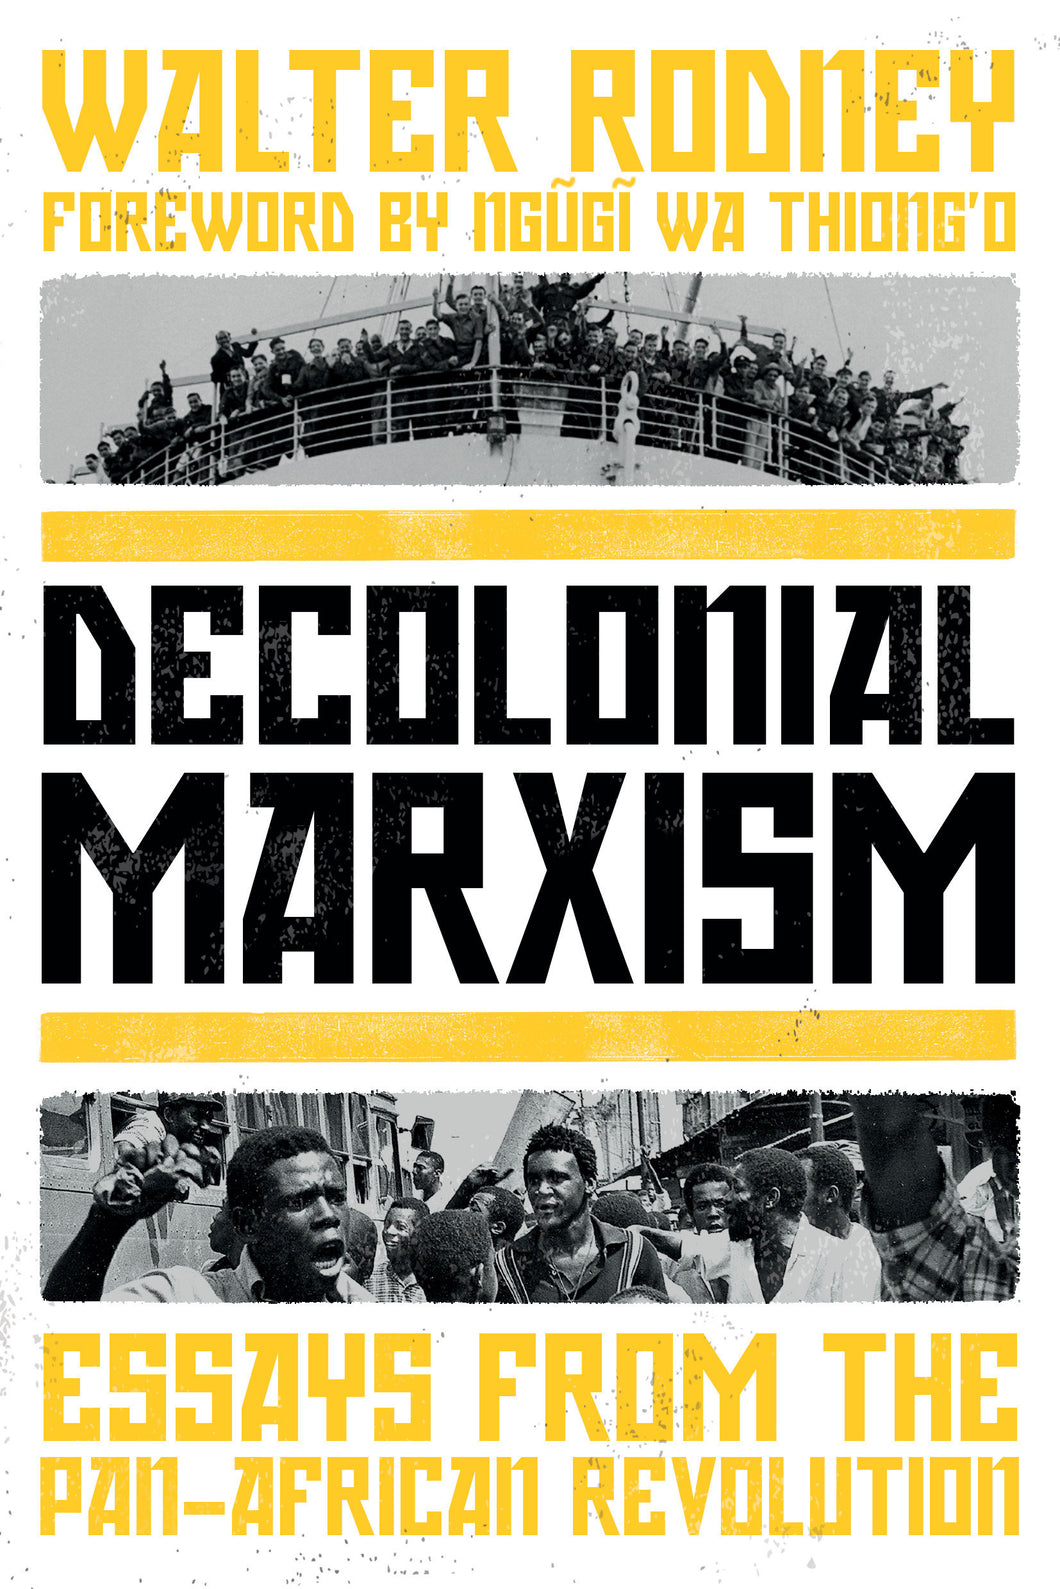 Decolonial Marxism: Essays from the Pan-African Revolution